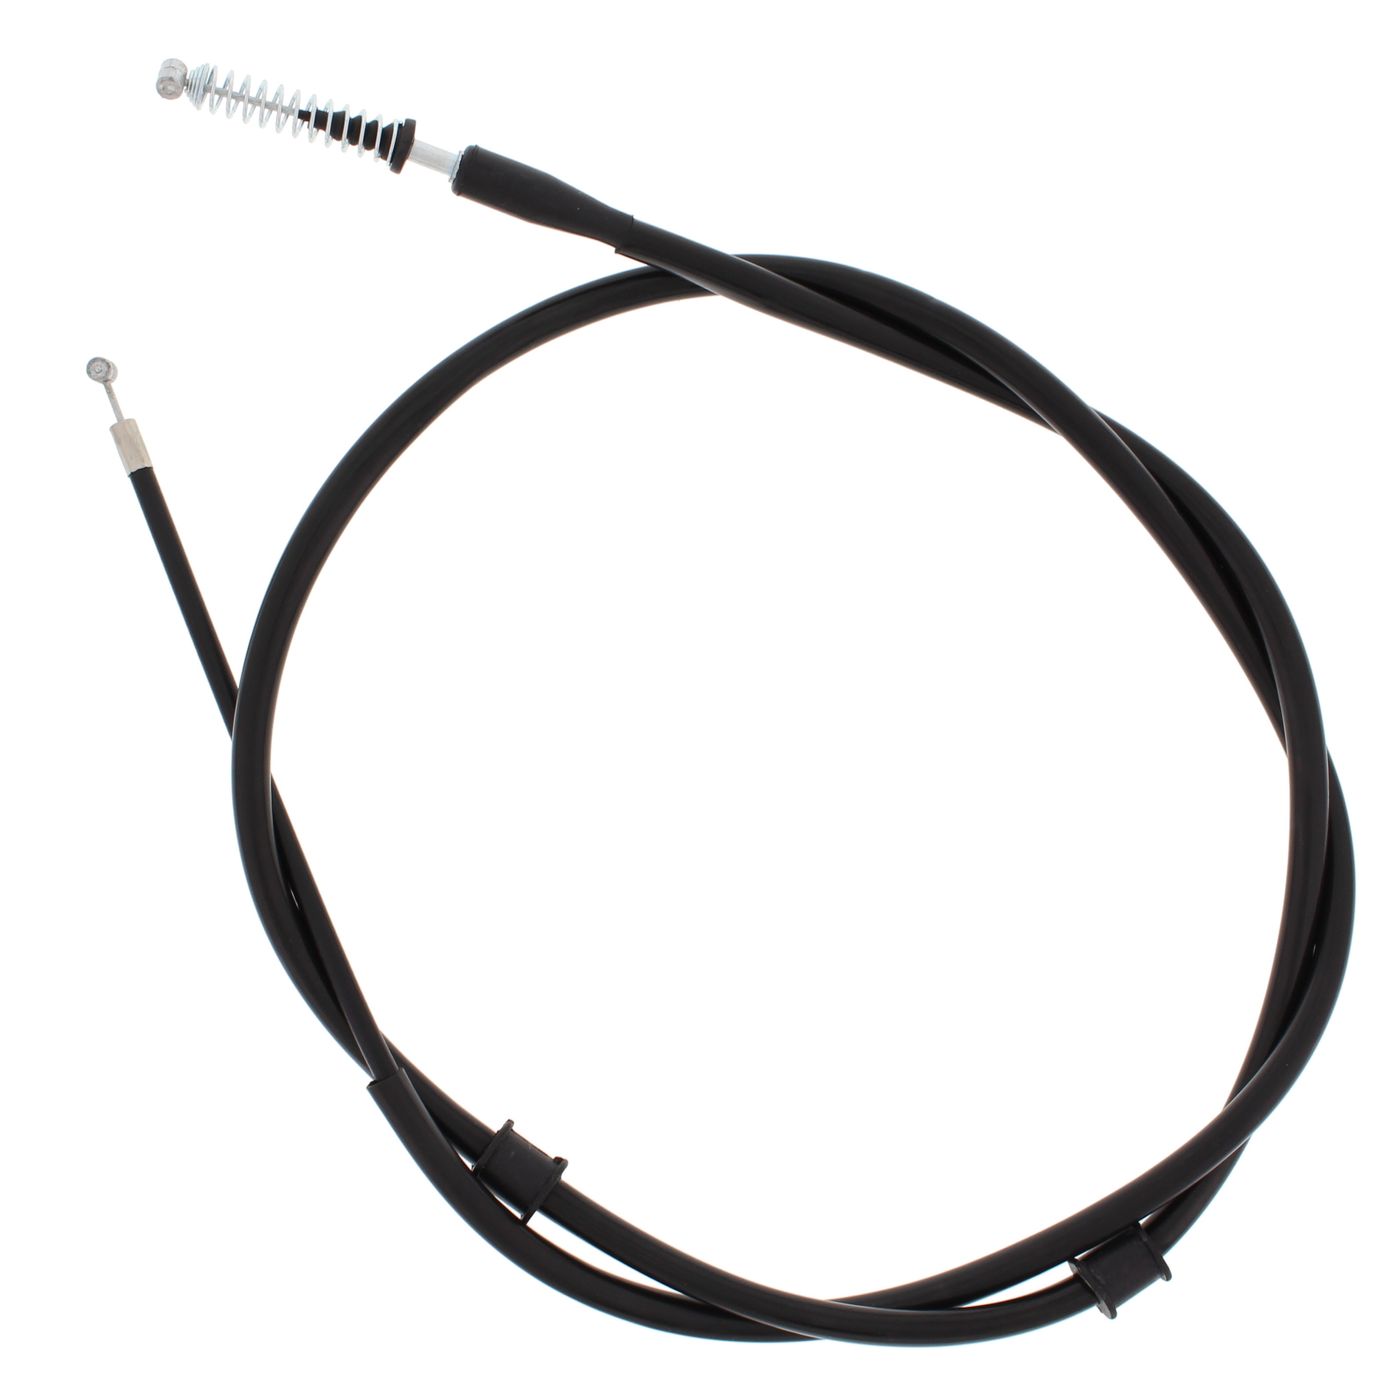 Wrp Brake Cables - WRP454018 image